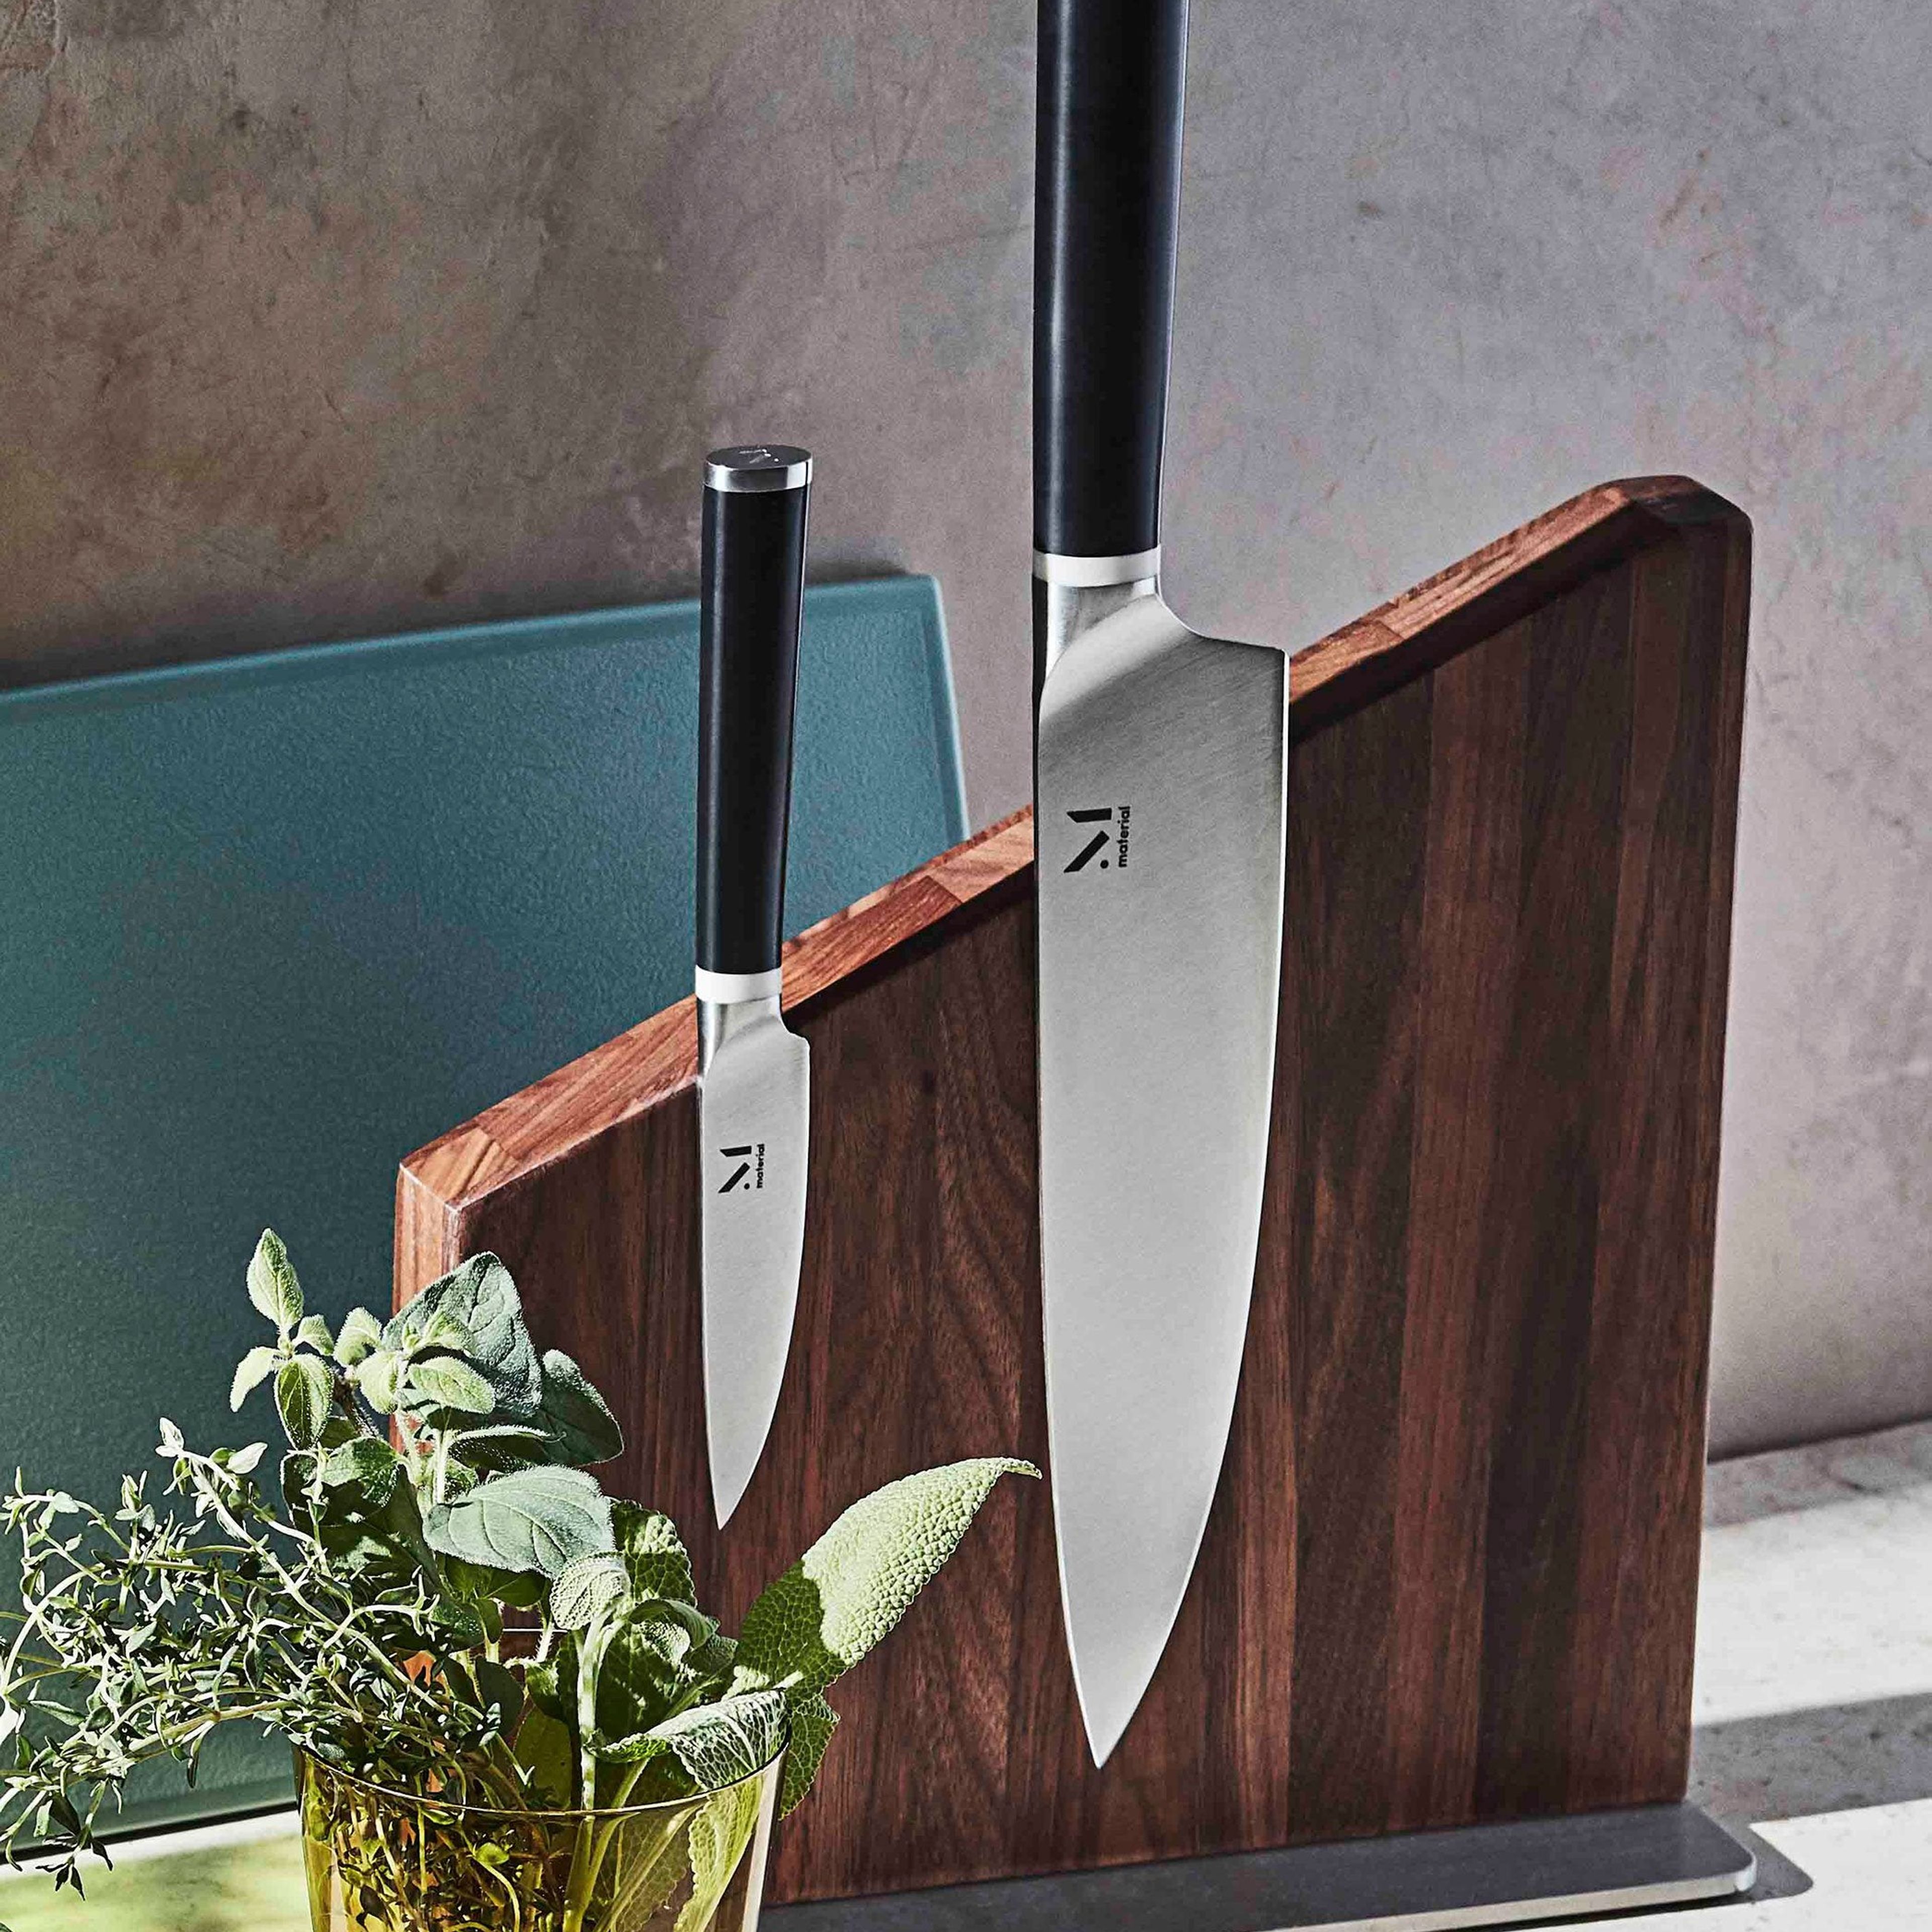 The Knives + Stand